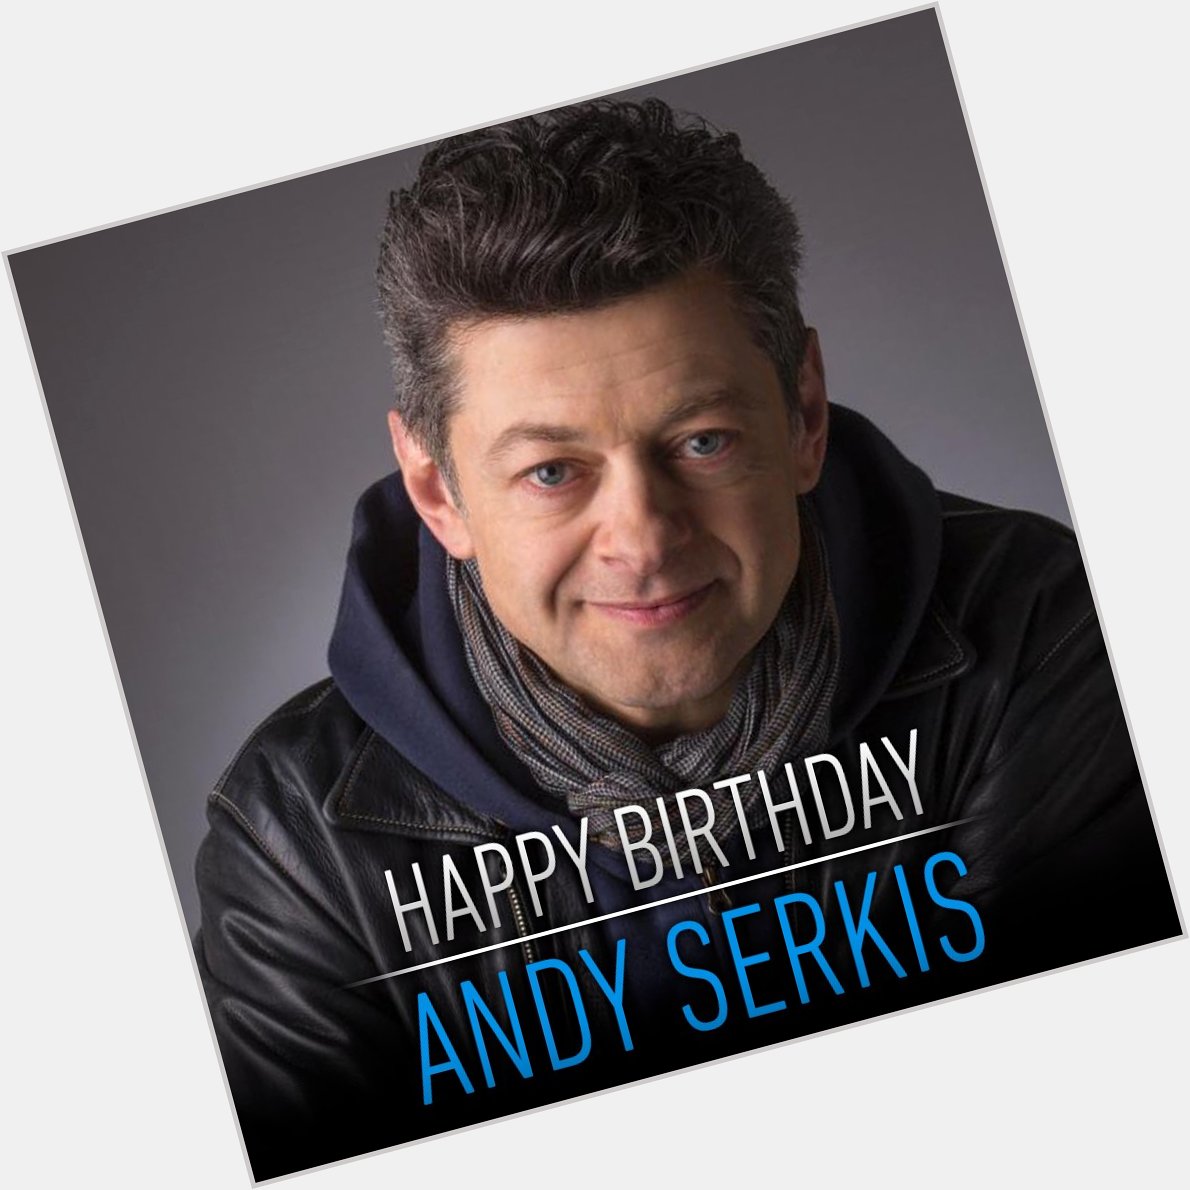 Happy birthday to the man behind Supreme Leader Snoke. message us your birthday wishes for Andy Serkis 